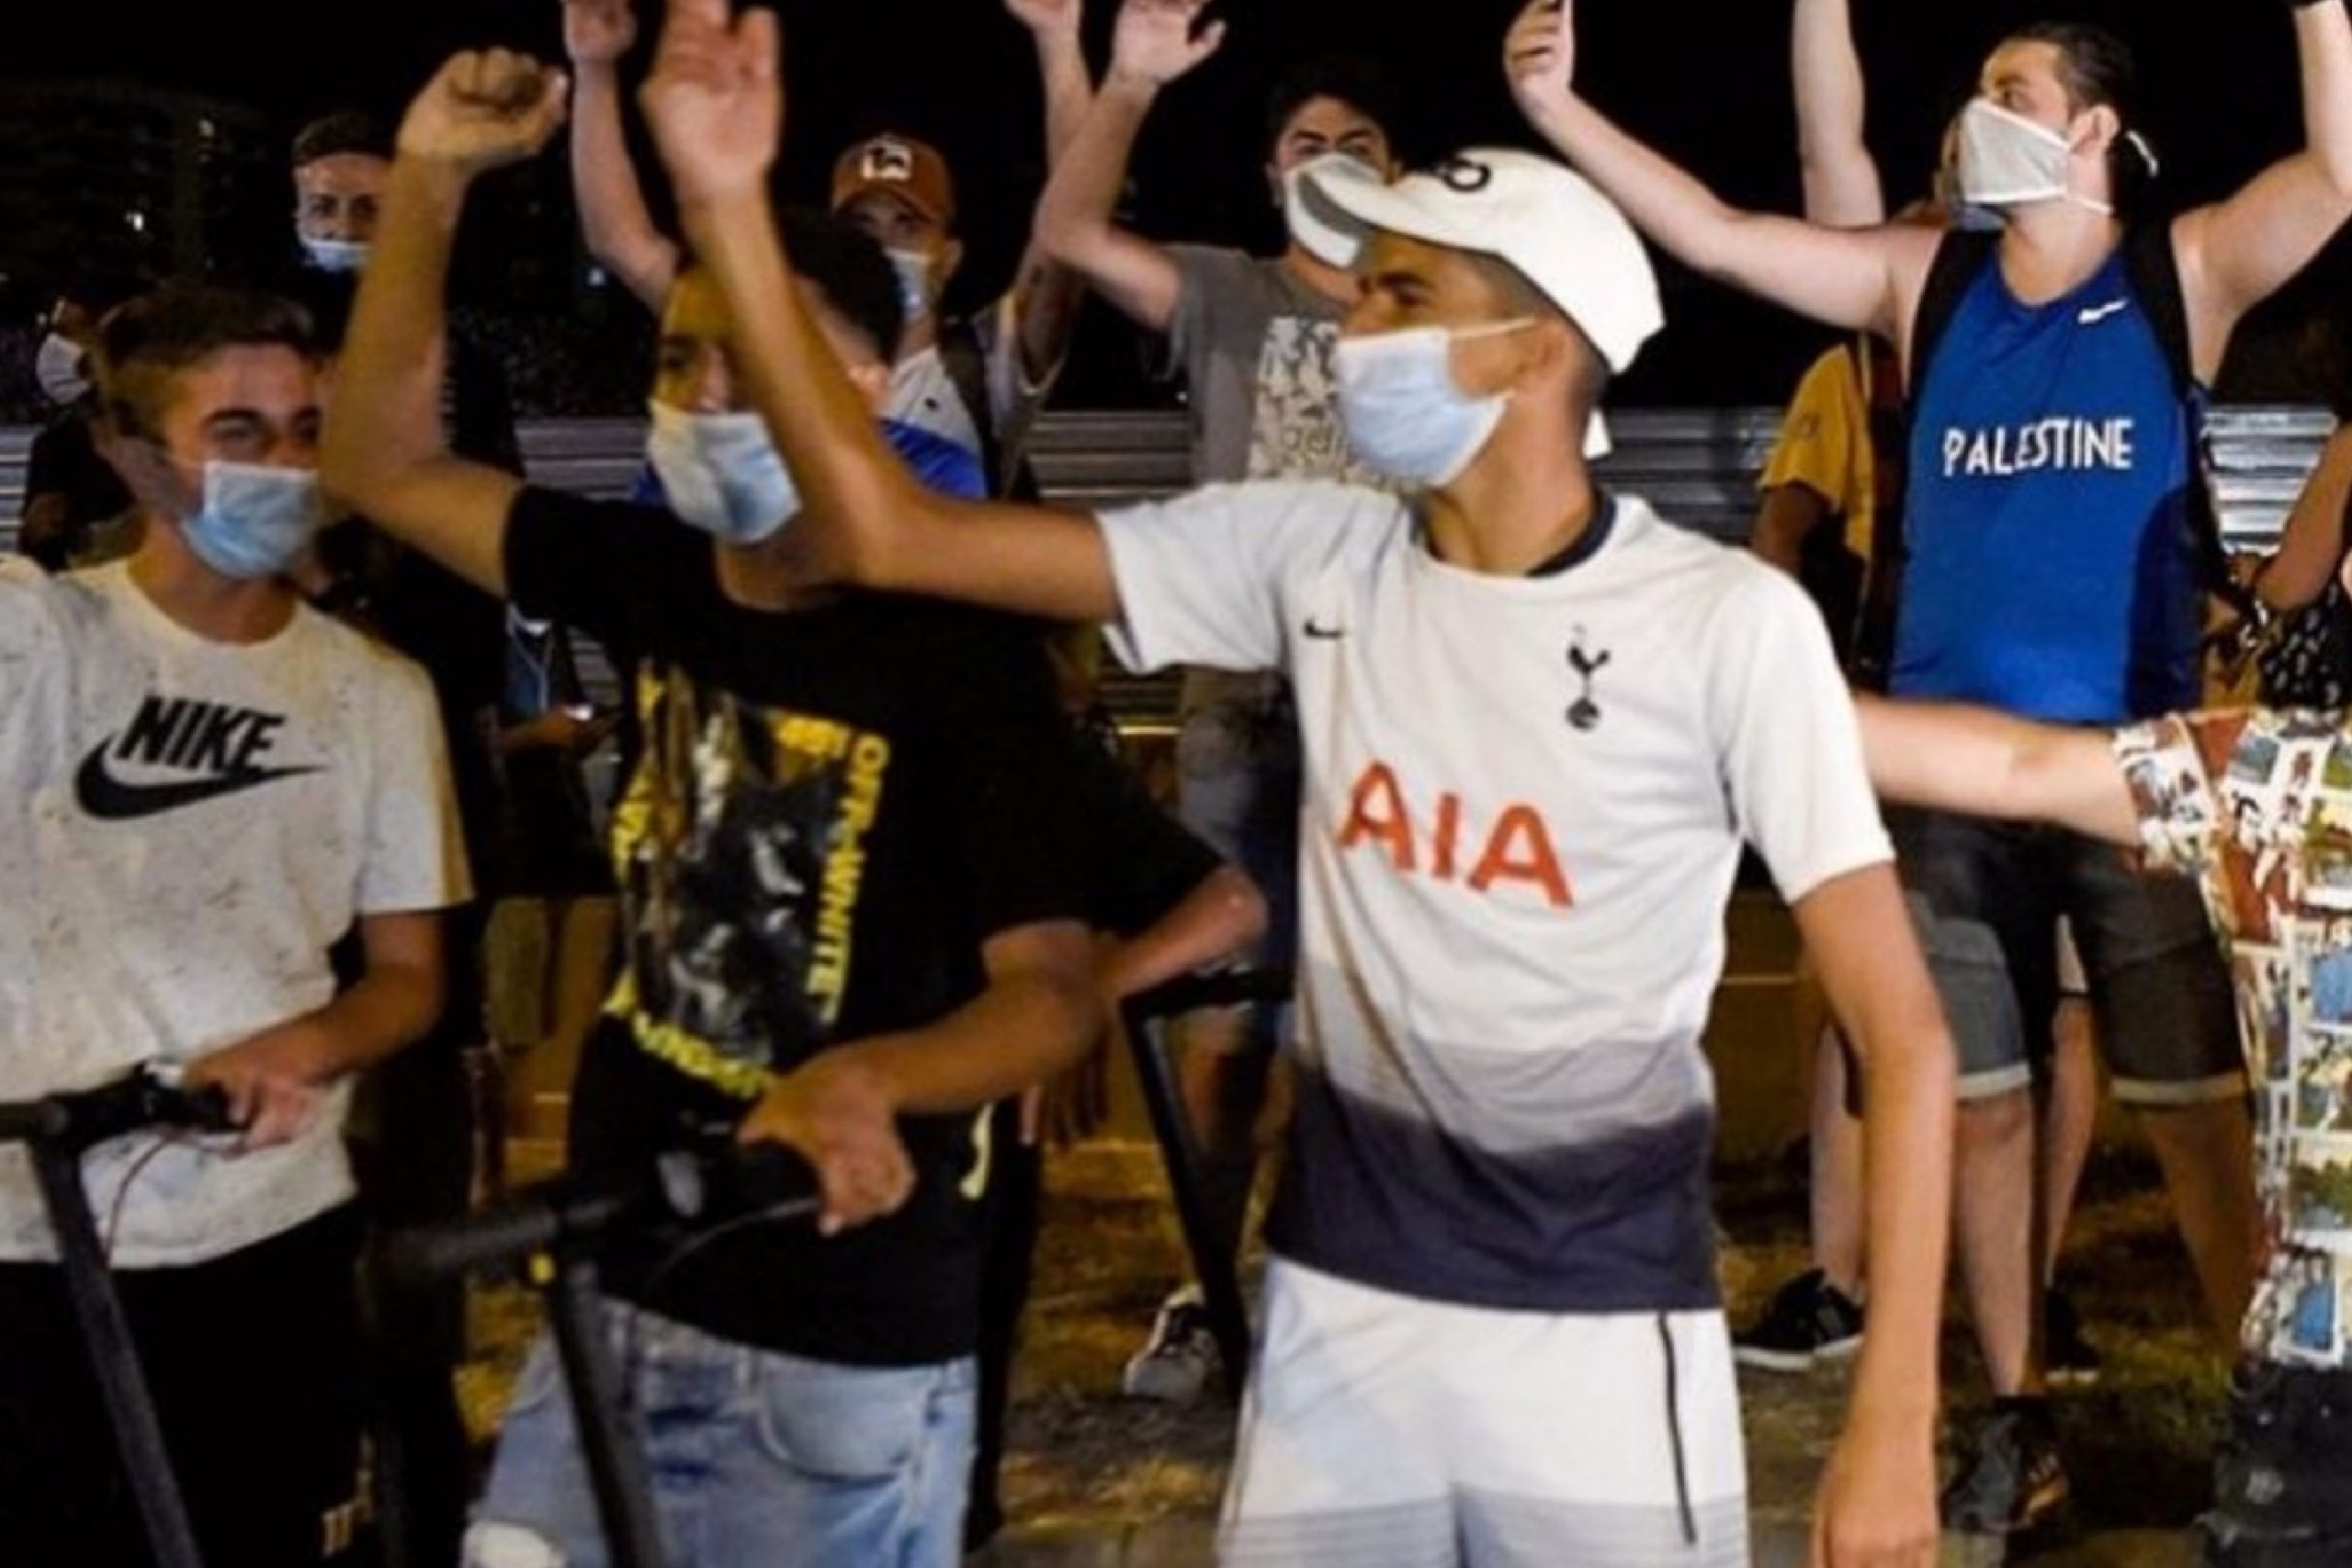 Fan spotted wearing knockoff version of 2018/19 Tottenham home kit during Barcelona protests last night